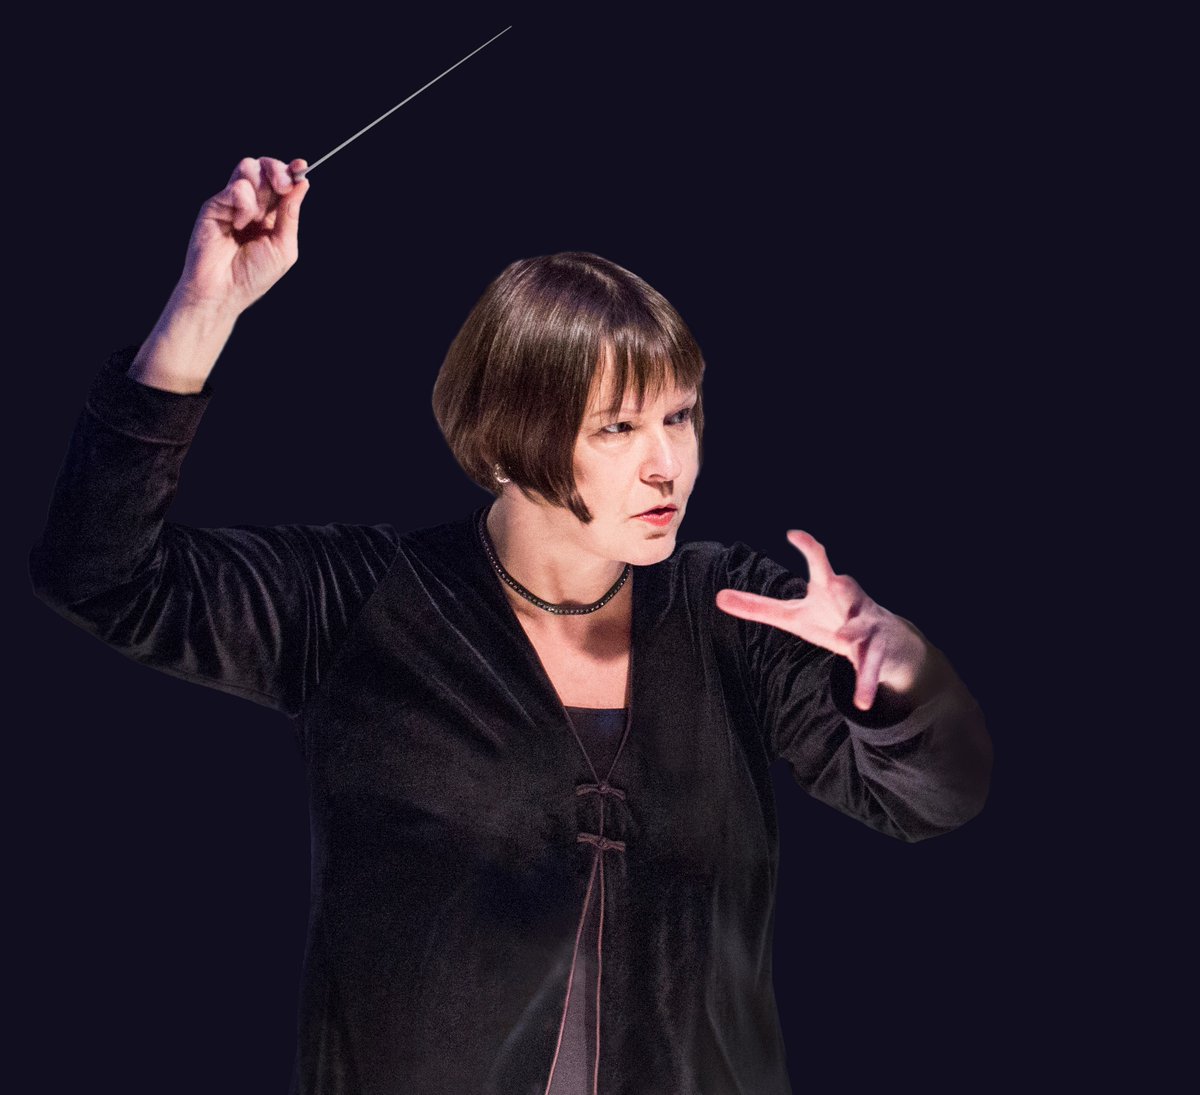 On the eve-eve of #InternationalWomensDay we are celebrating career of alumna, Alice Farnham (Music, 1989) @BatonAlice who is one of Britain’s leading conductors and most recently, was shortlisted for Conductor of the Year by The Royal Philharmonic Society bit.ly/3uYuYB8